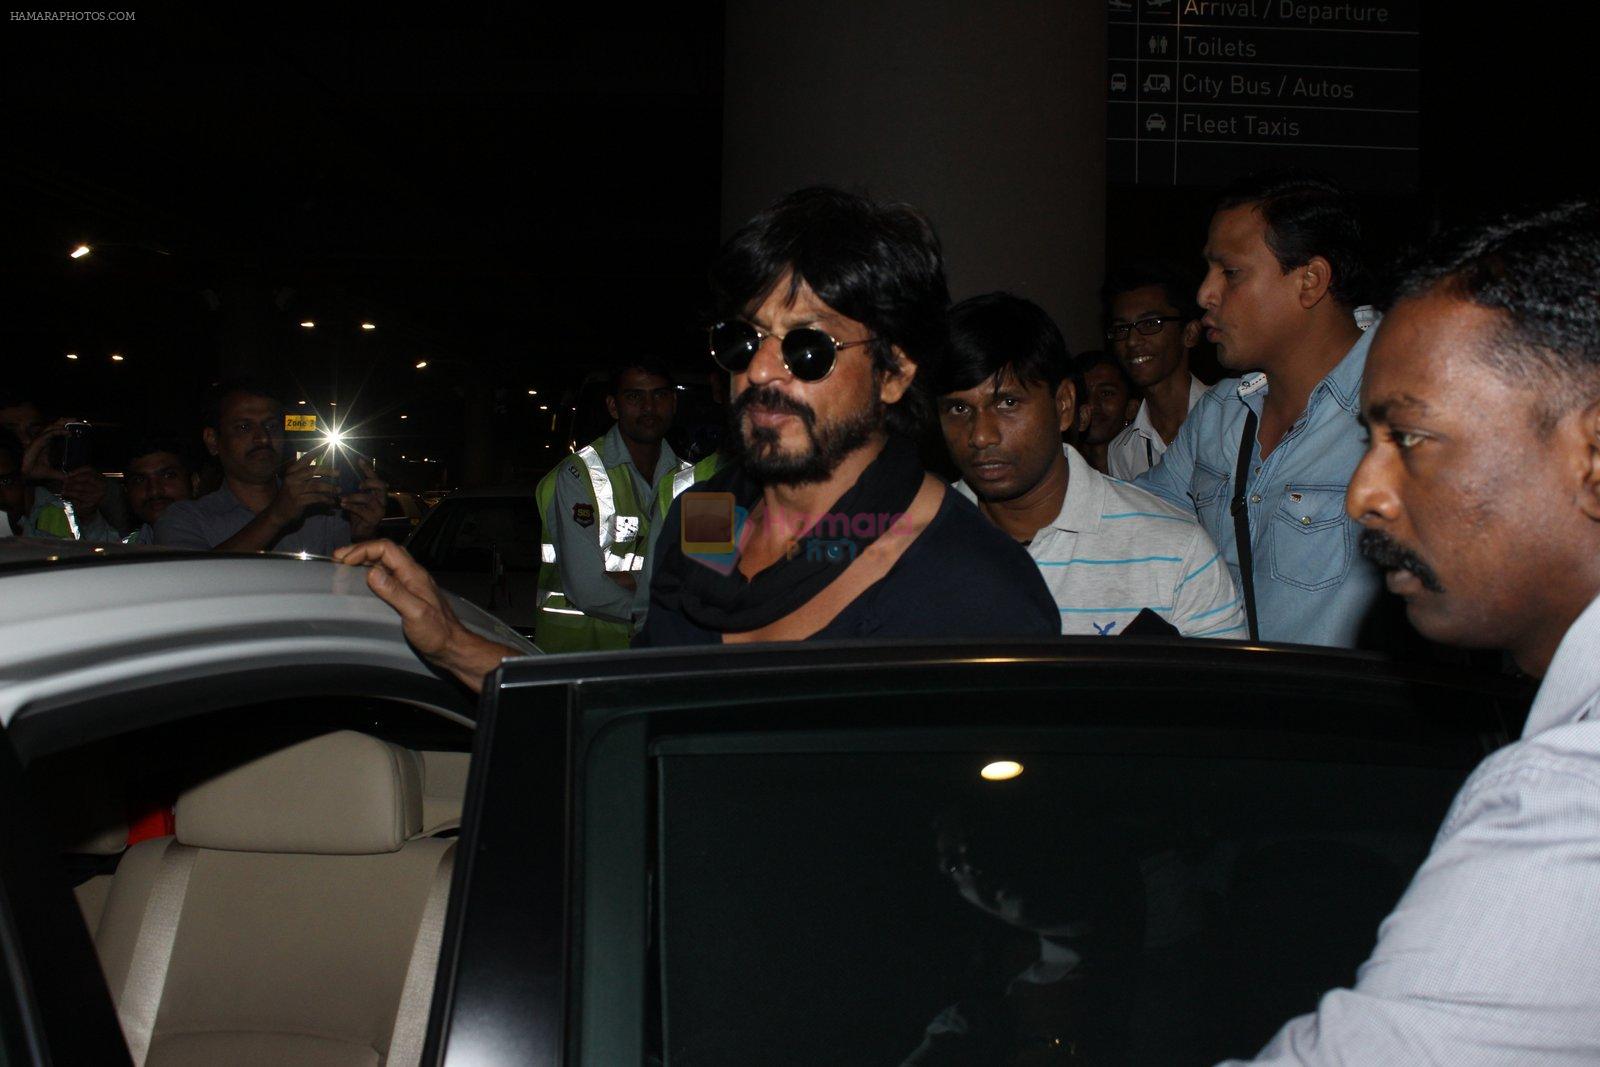 Shahrukh Khan snapped at airport on 20th March 2016